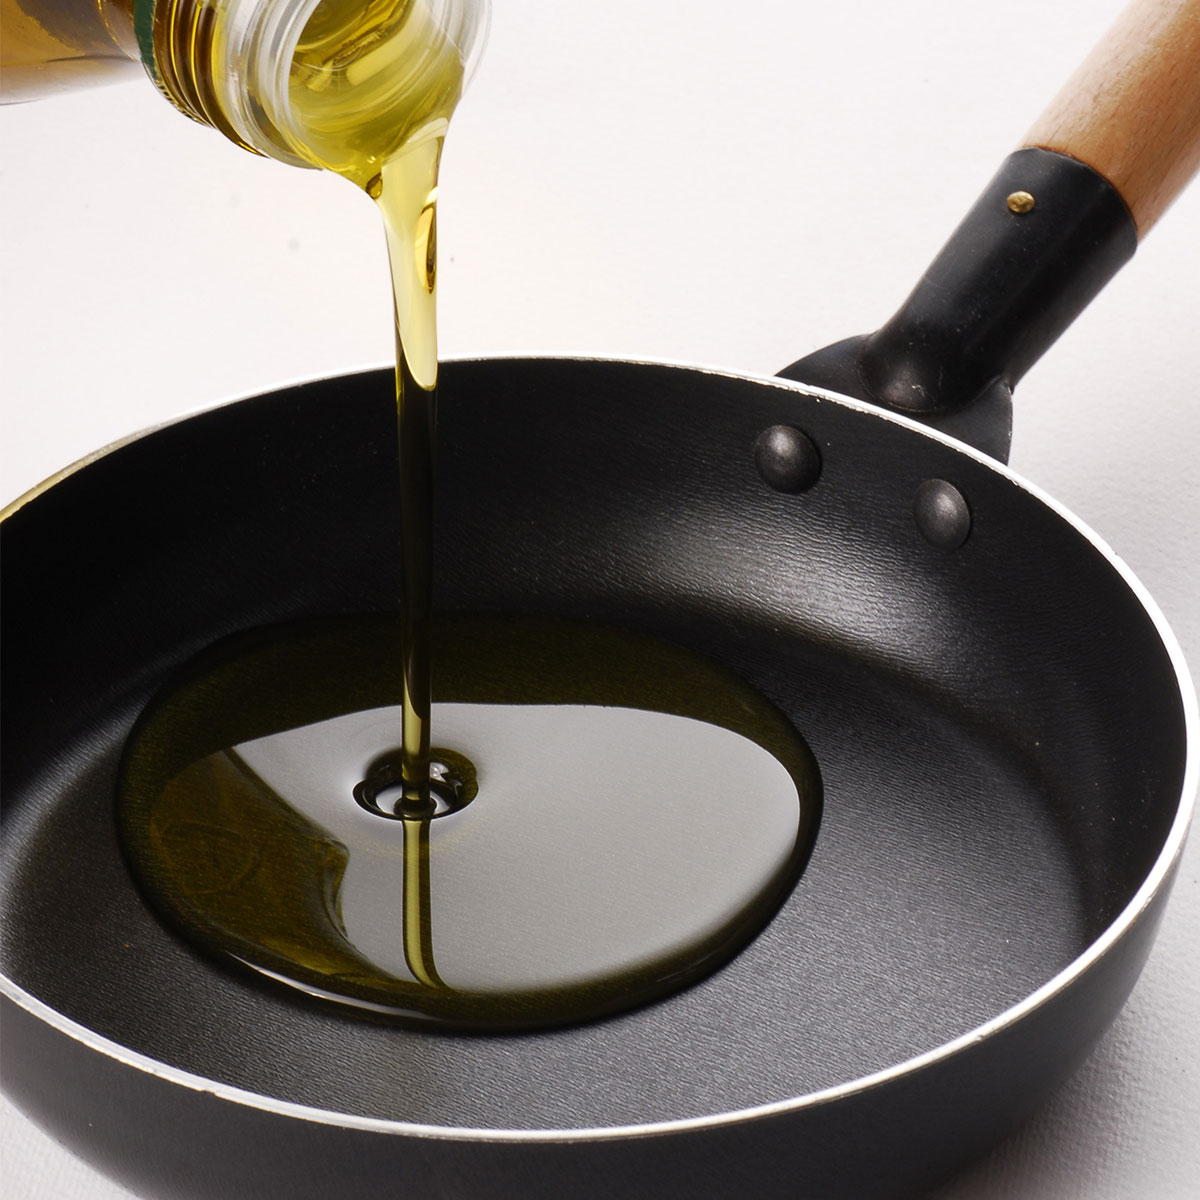 Dietitian Reveals The Worst Oils In Your Kitchen For Your Heart - SHEfinds